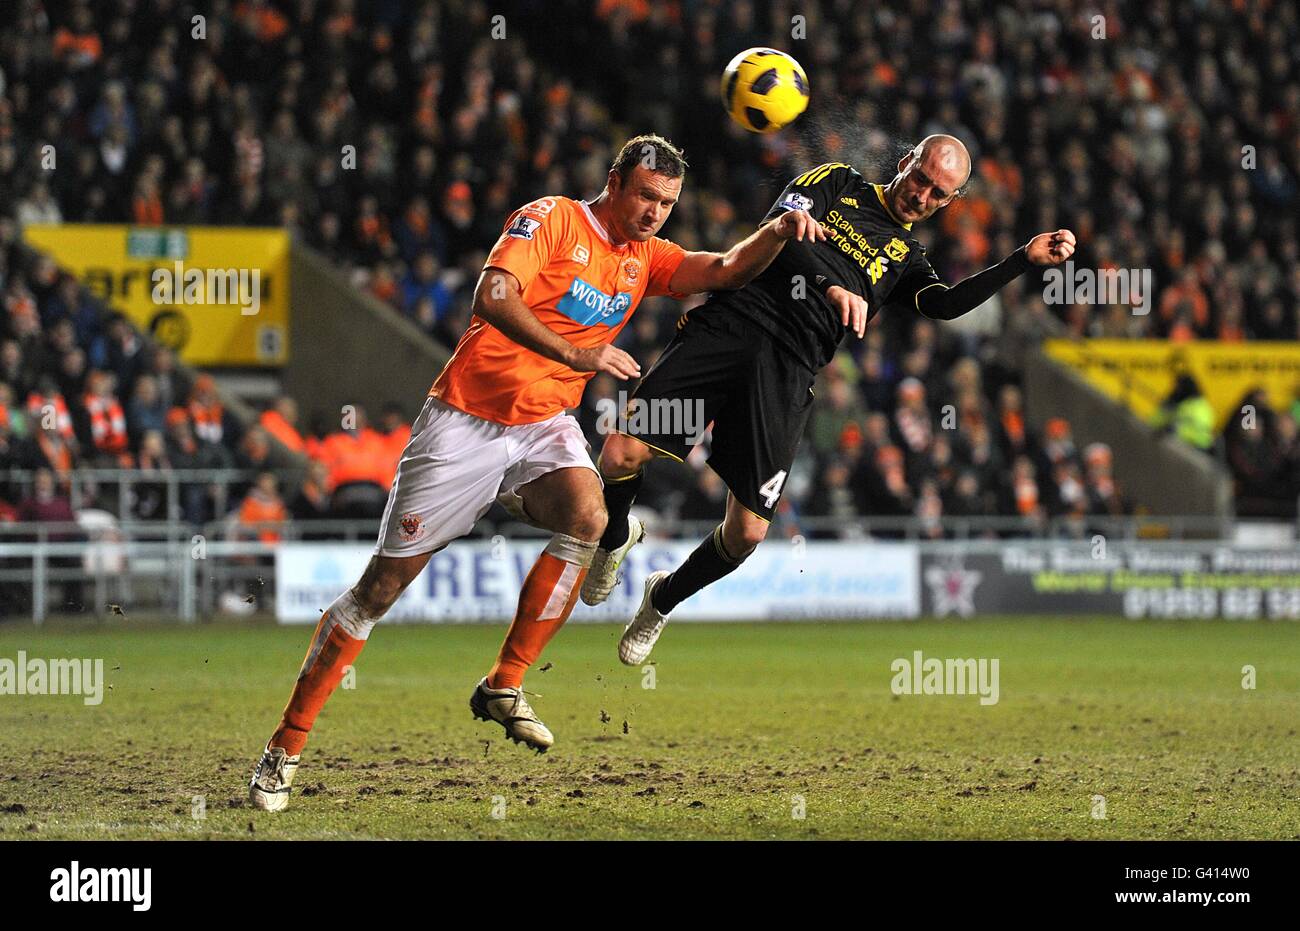 Soccer - Barclays Premier League - Blackpool v Liverpool - Bloomfield Road. Liverpool's Raul Meireles (right) in action with Blackpool's Ian Evatt Stock Photo